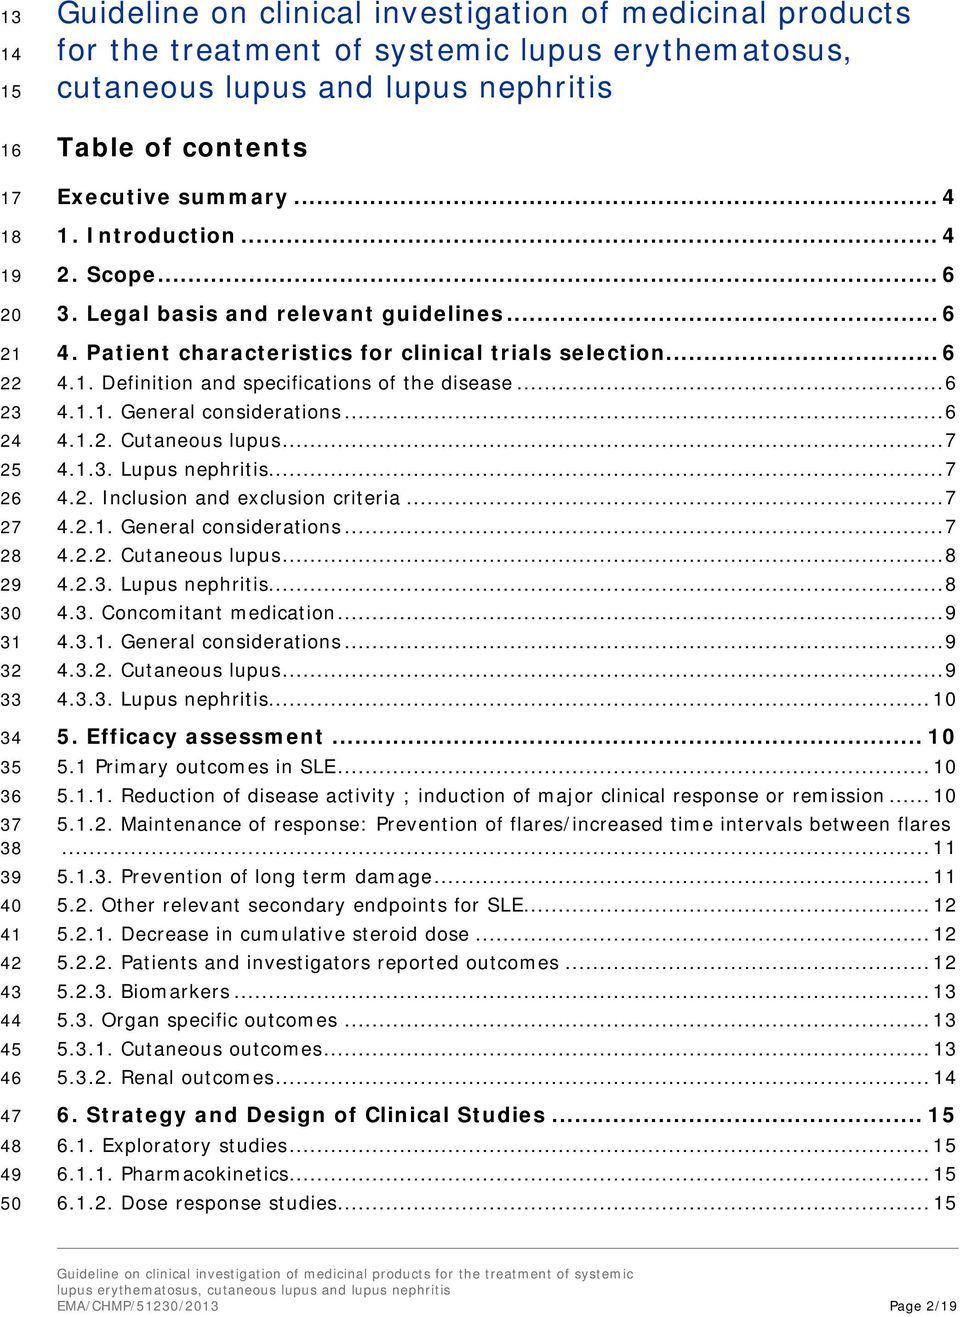 Patient characteristics for clinical trials selection... 6 4.1. Definition and specifications of the disease... 6 4.1.1. General considerations... 6 4.1.2. Cutaneous lupus... 7 4.1.3. Lupus nephritis.